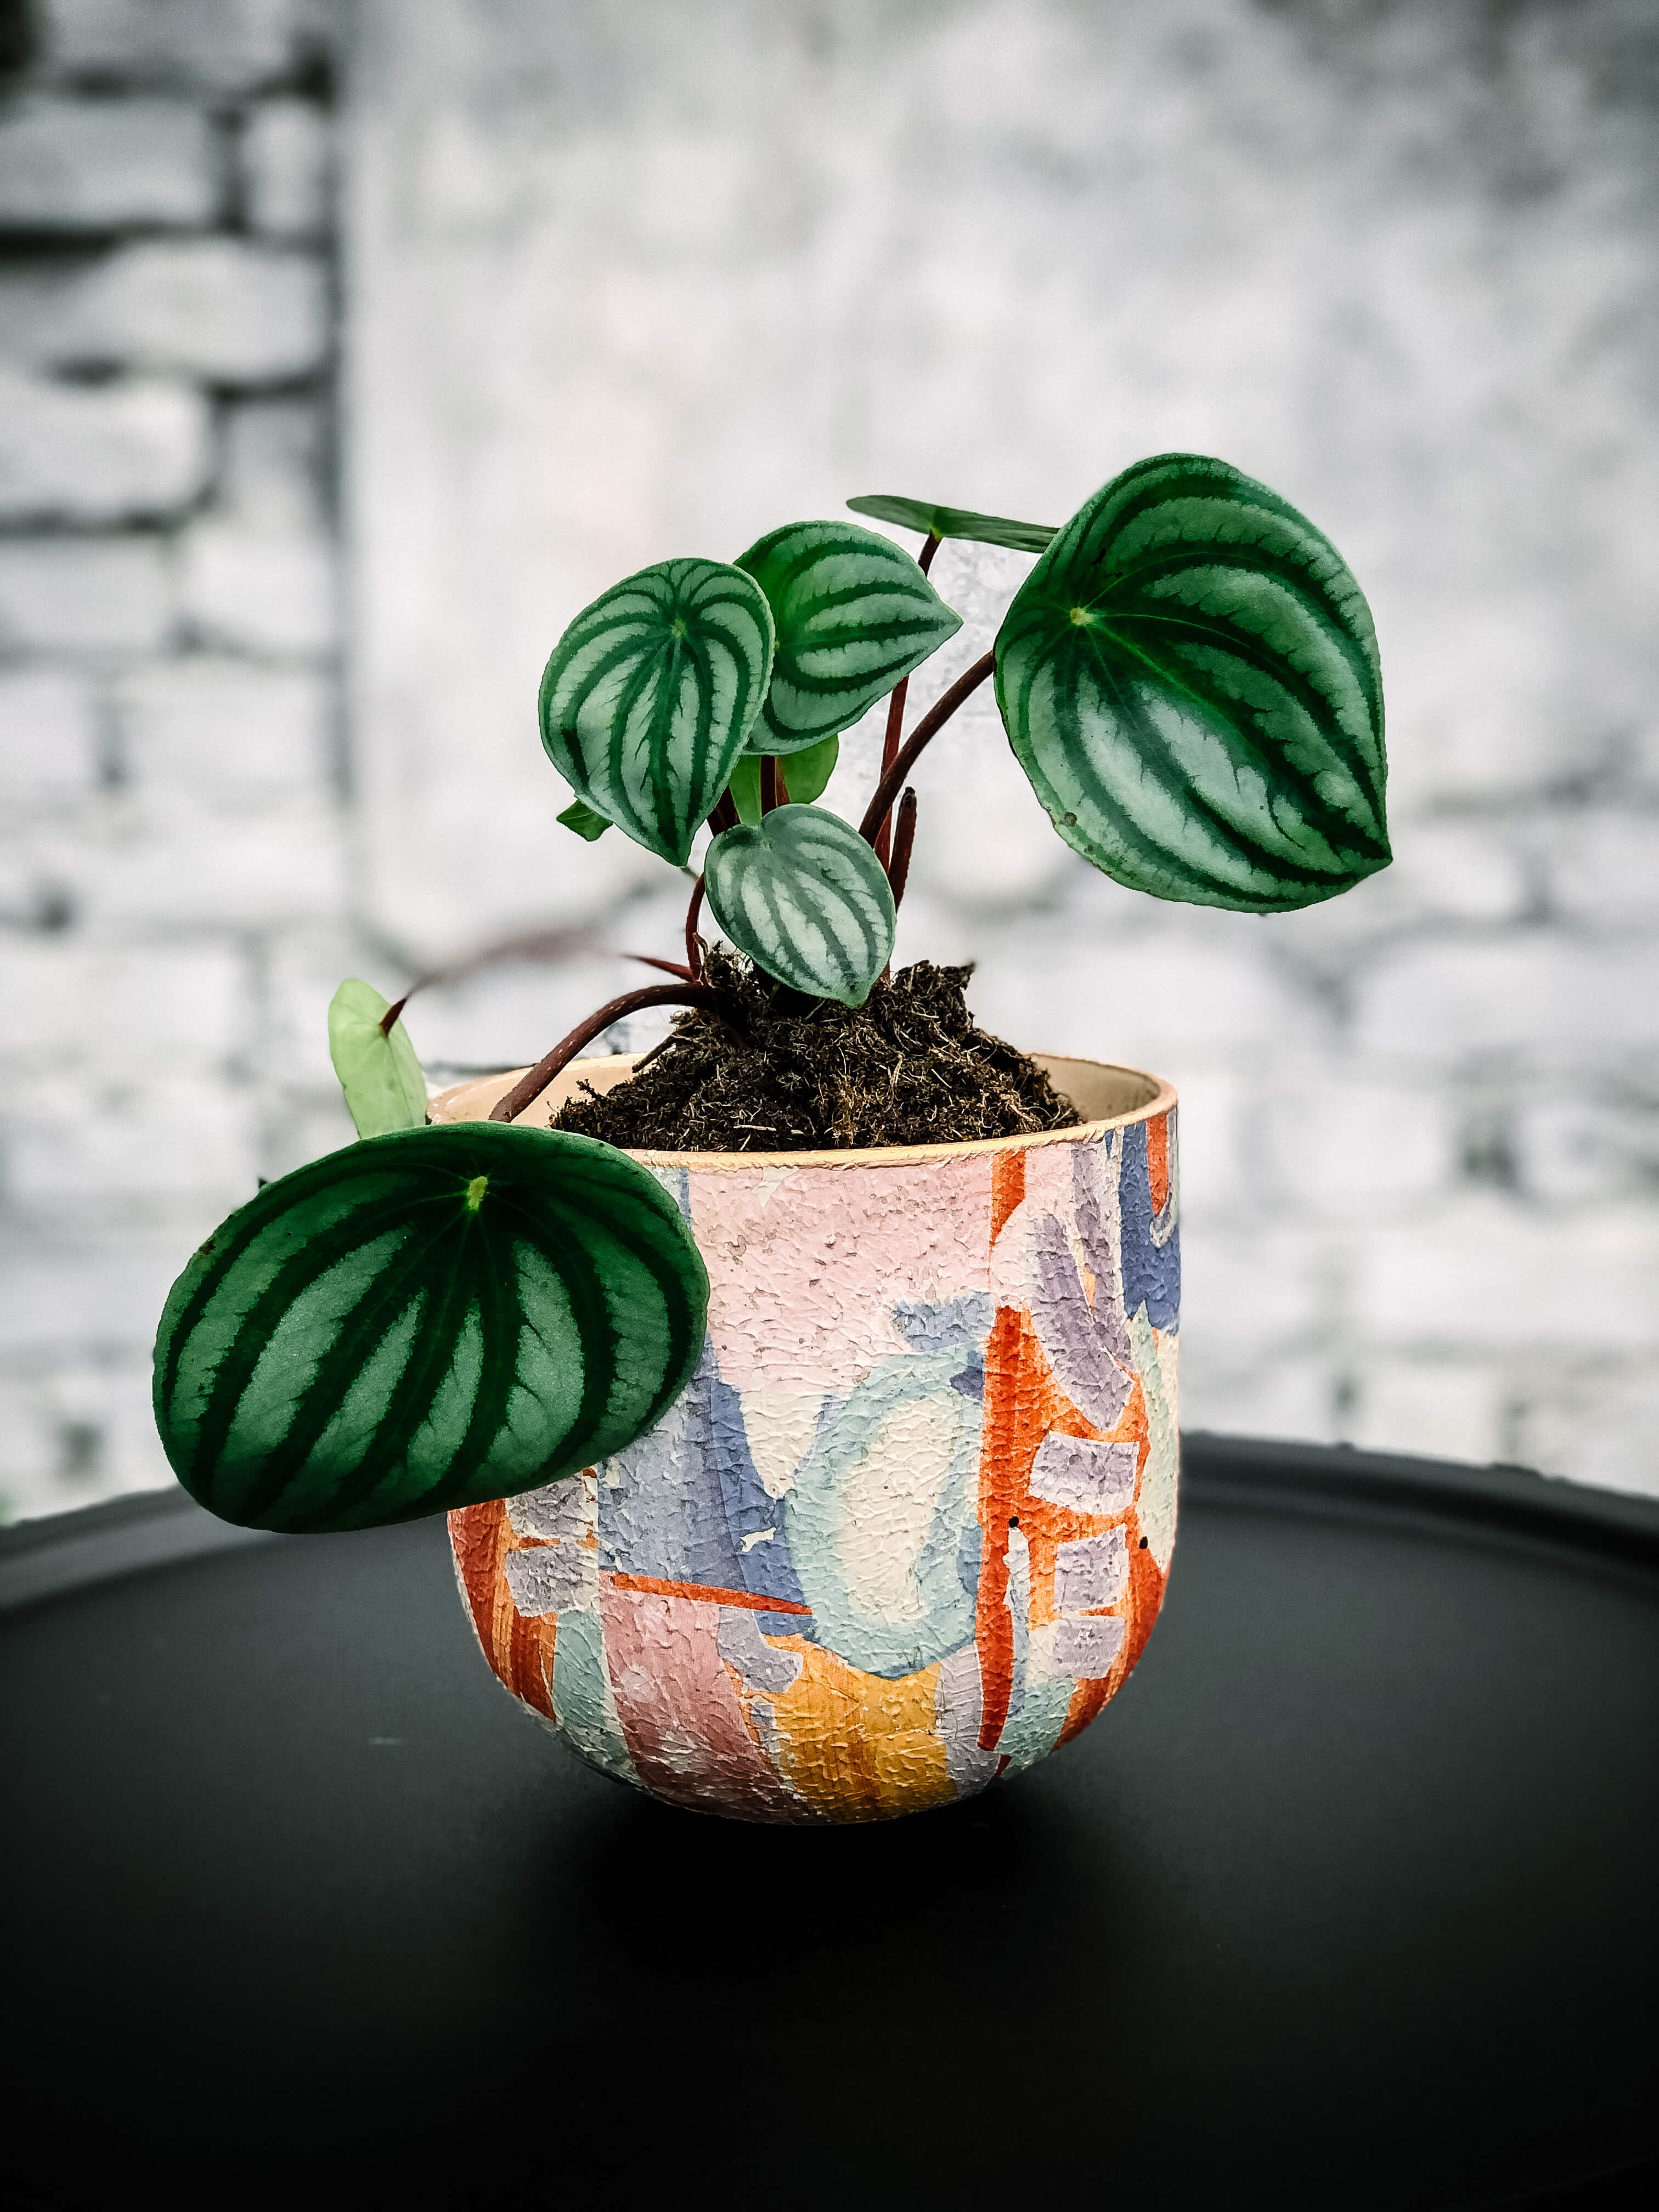 Limited! Watermelon Peperomia